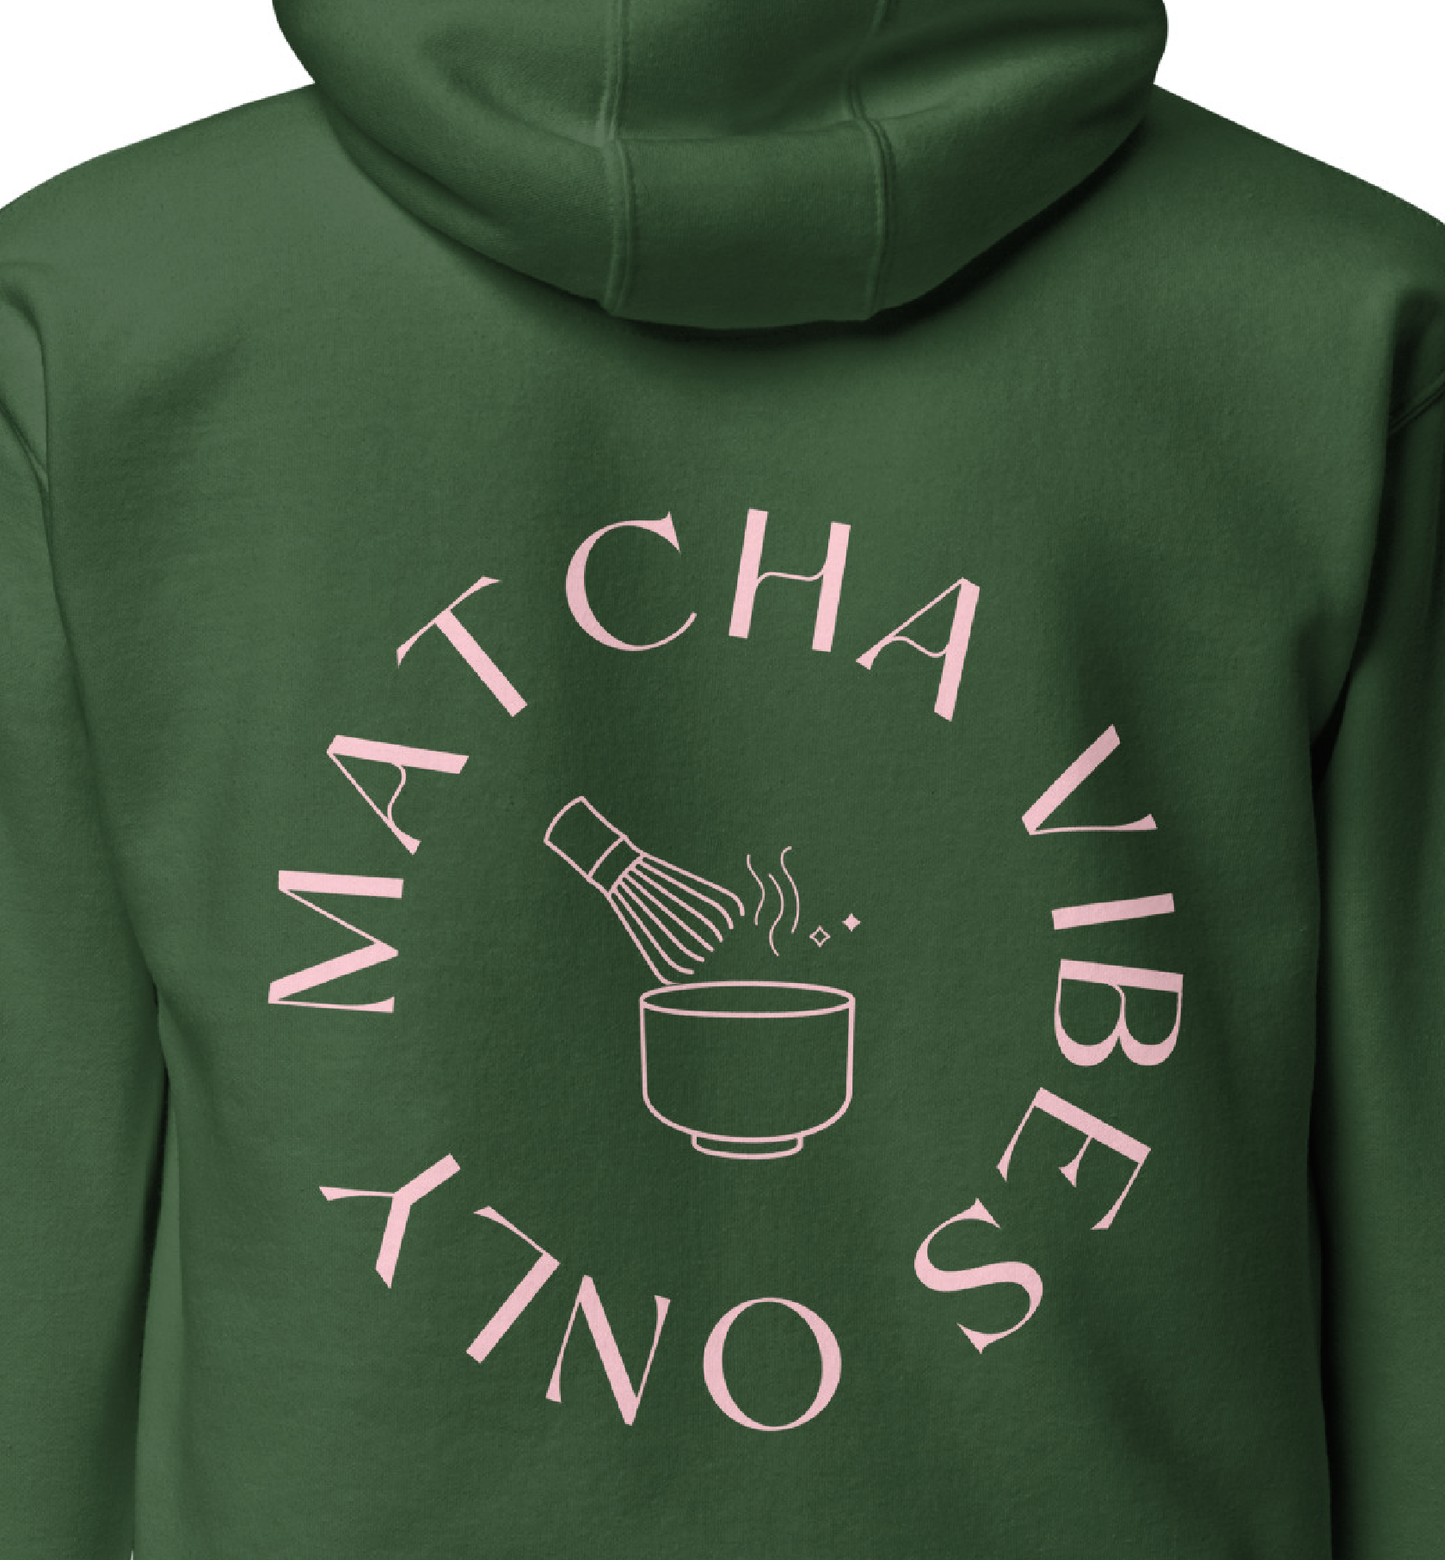 Matcha Vibes Only Unisex Hoodie